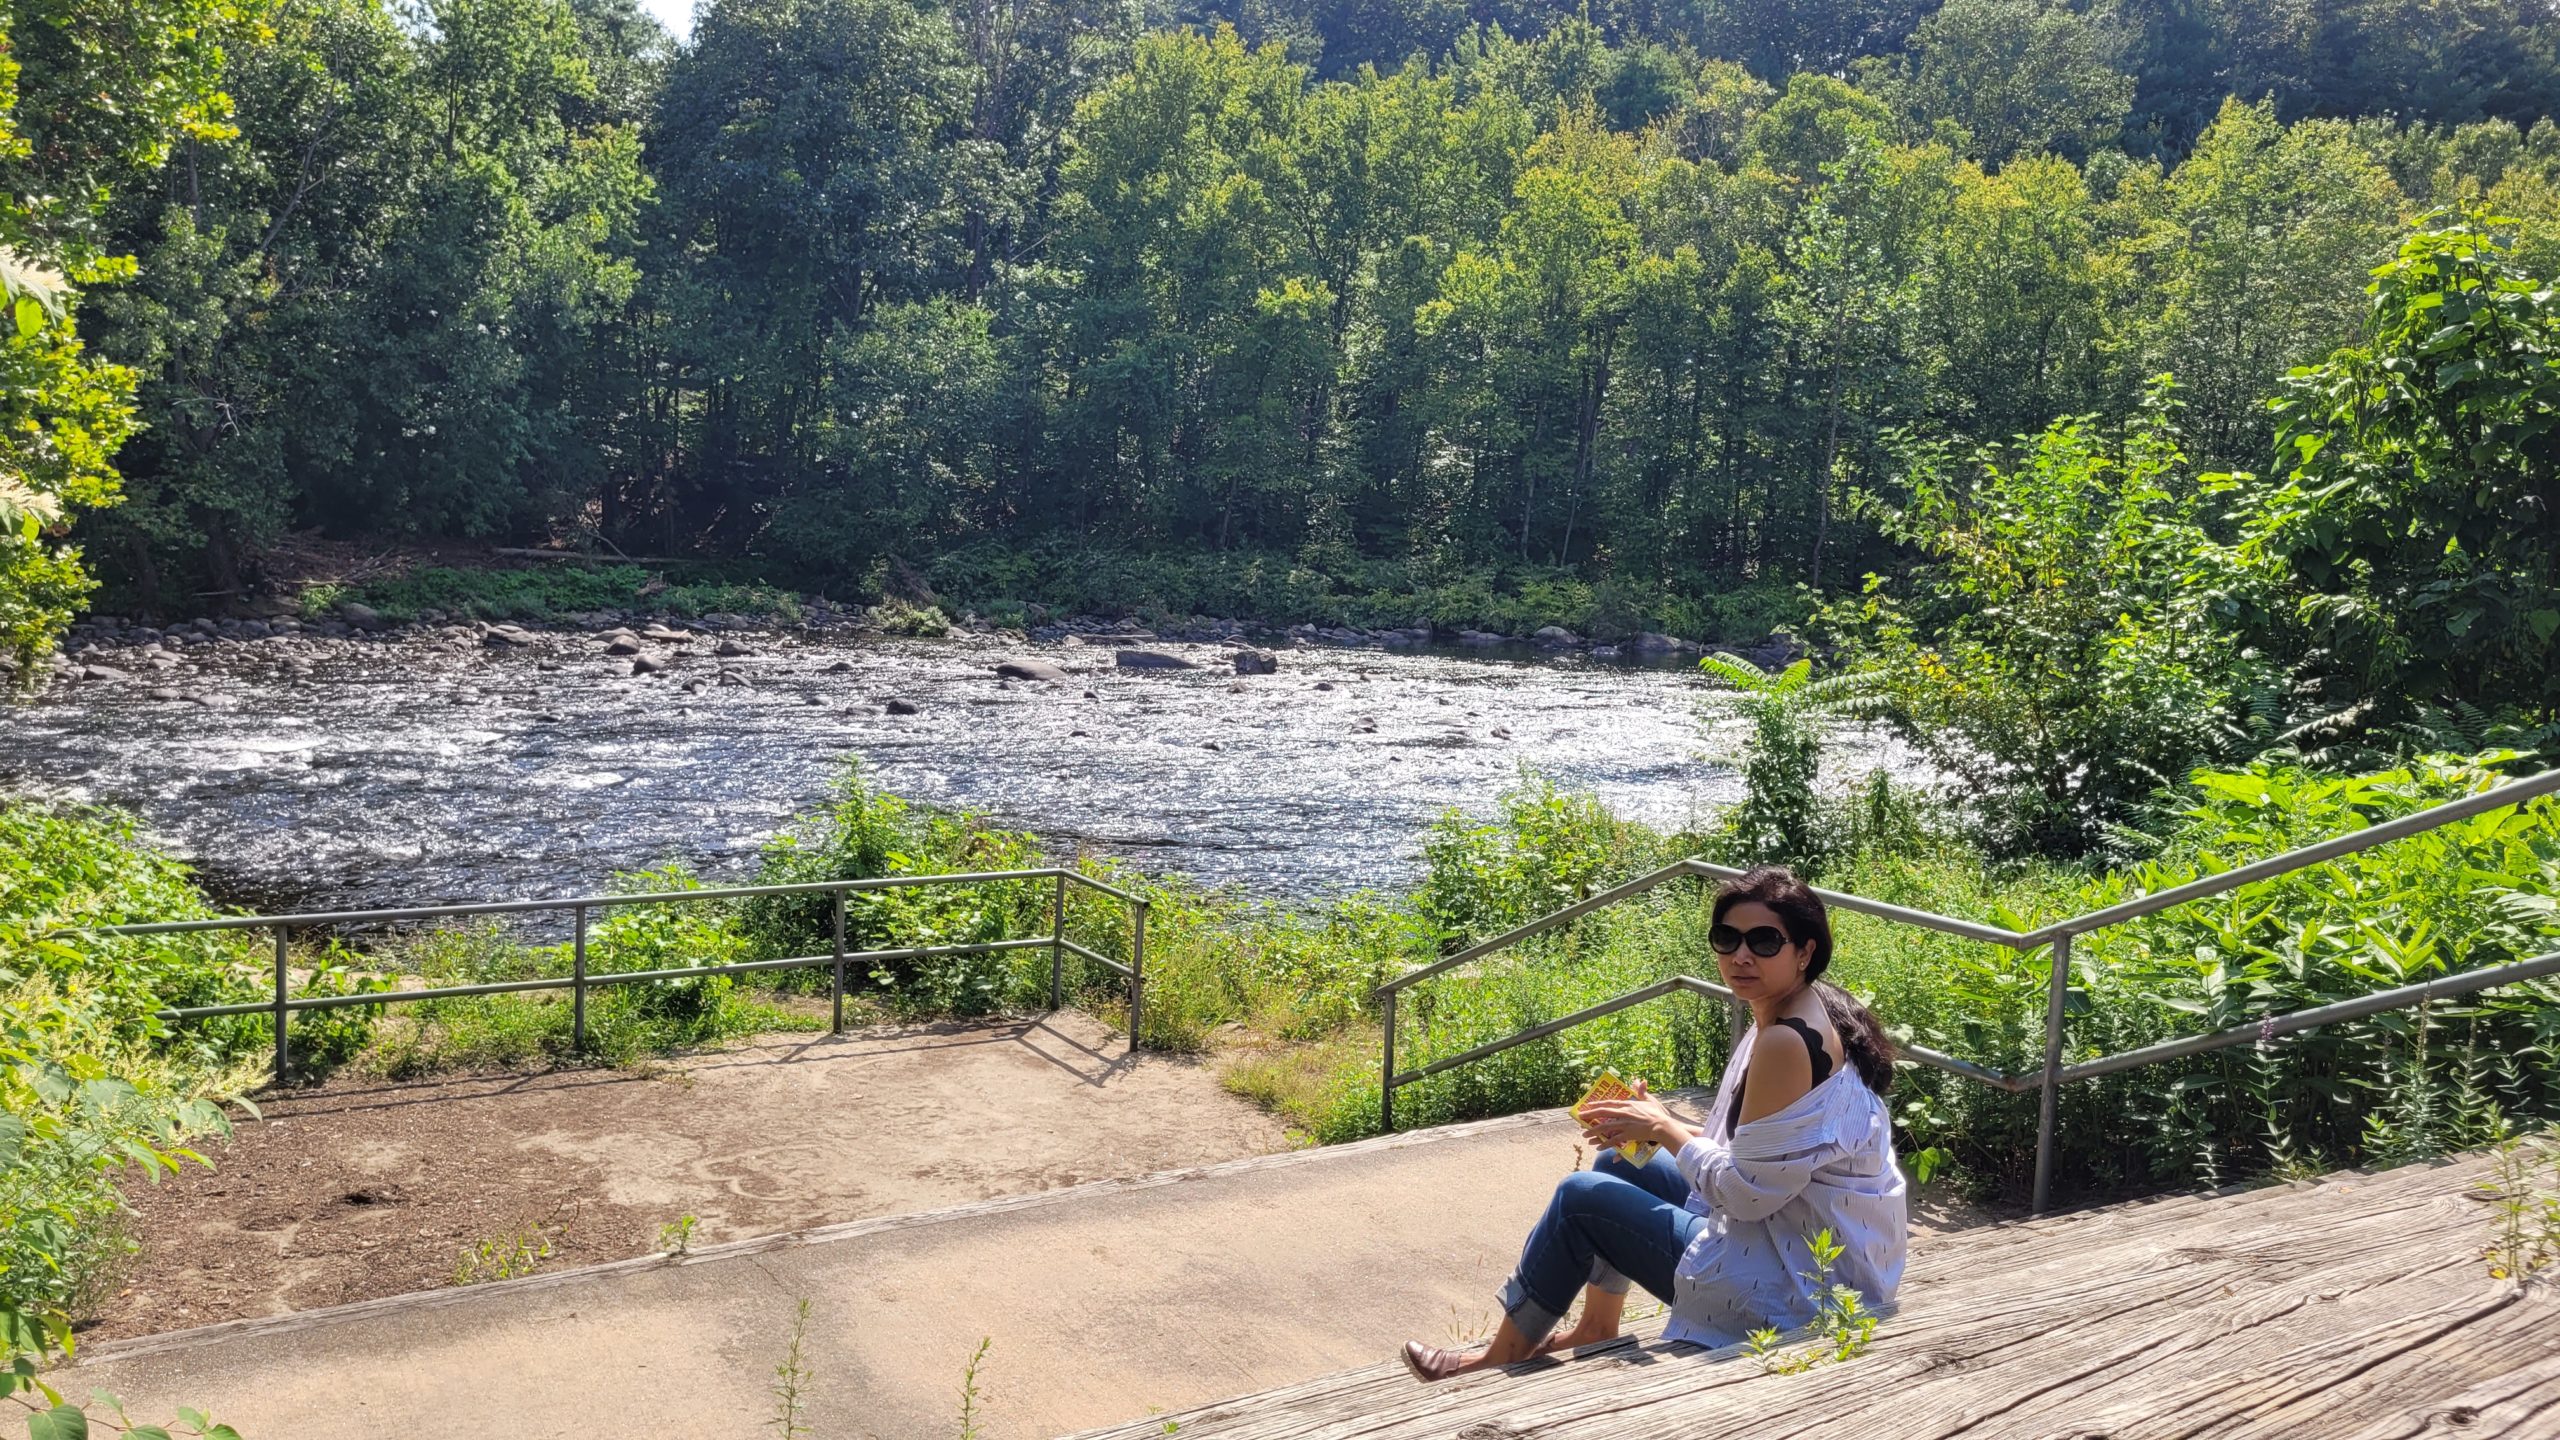 beacon falls hike and small town, new haven